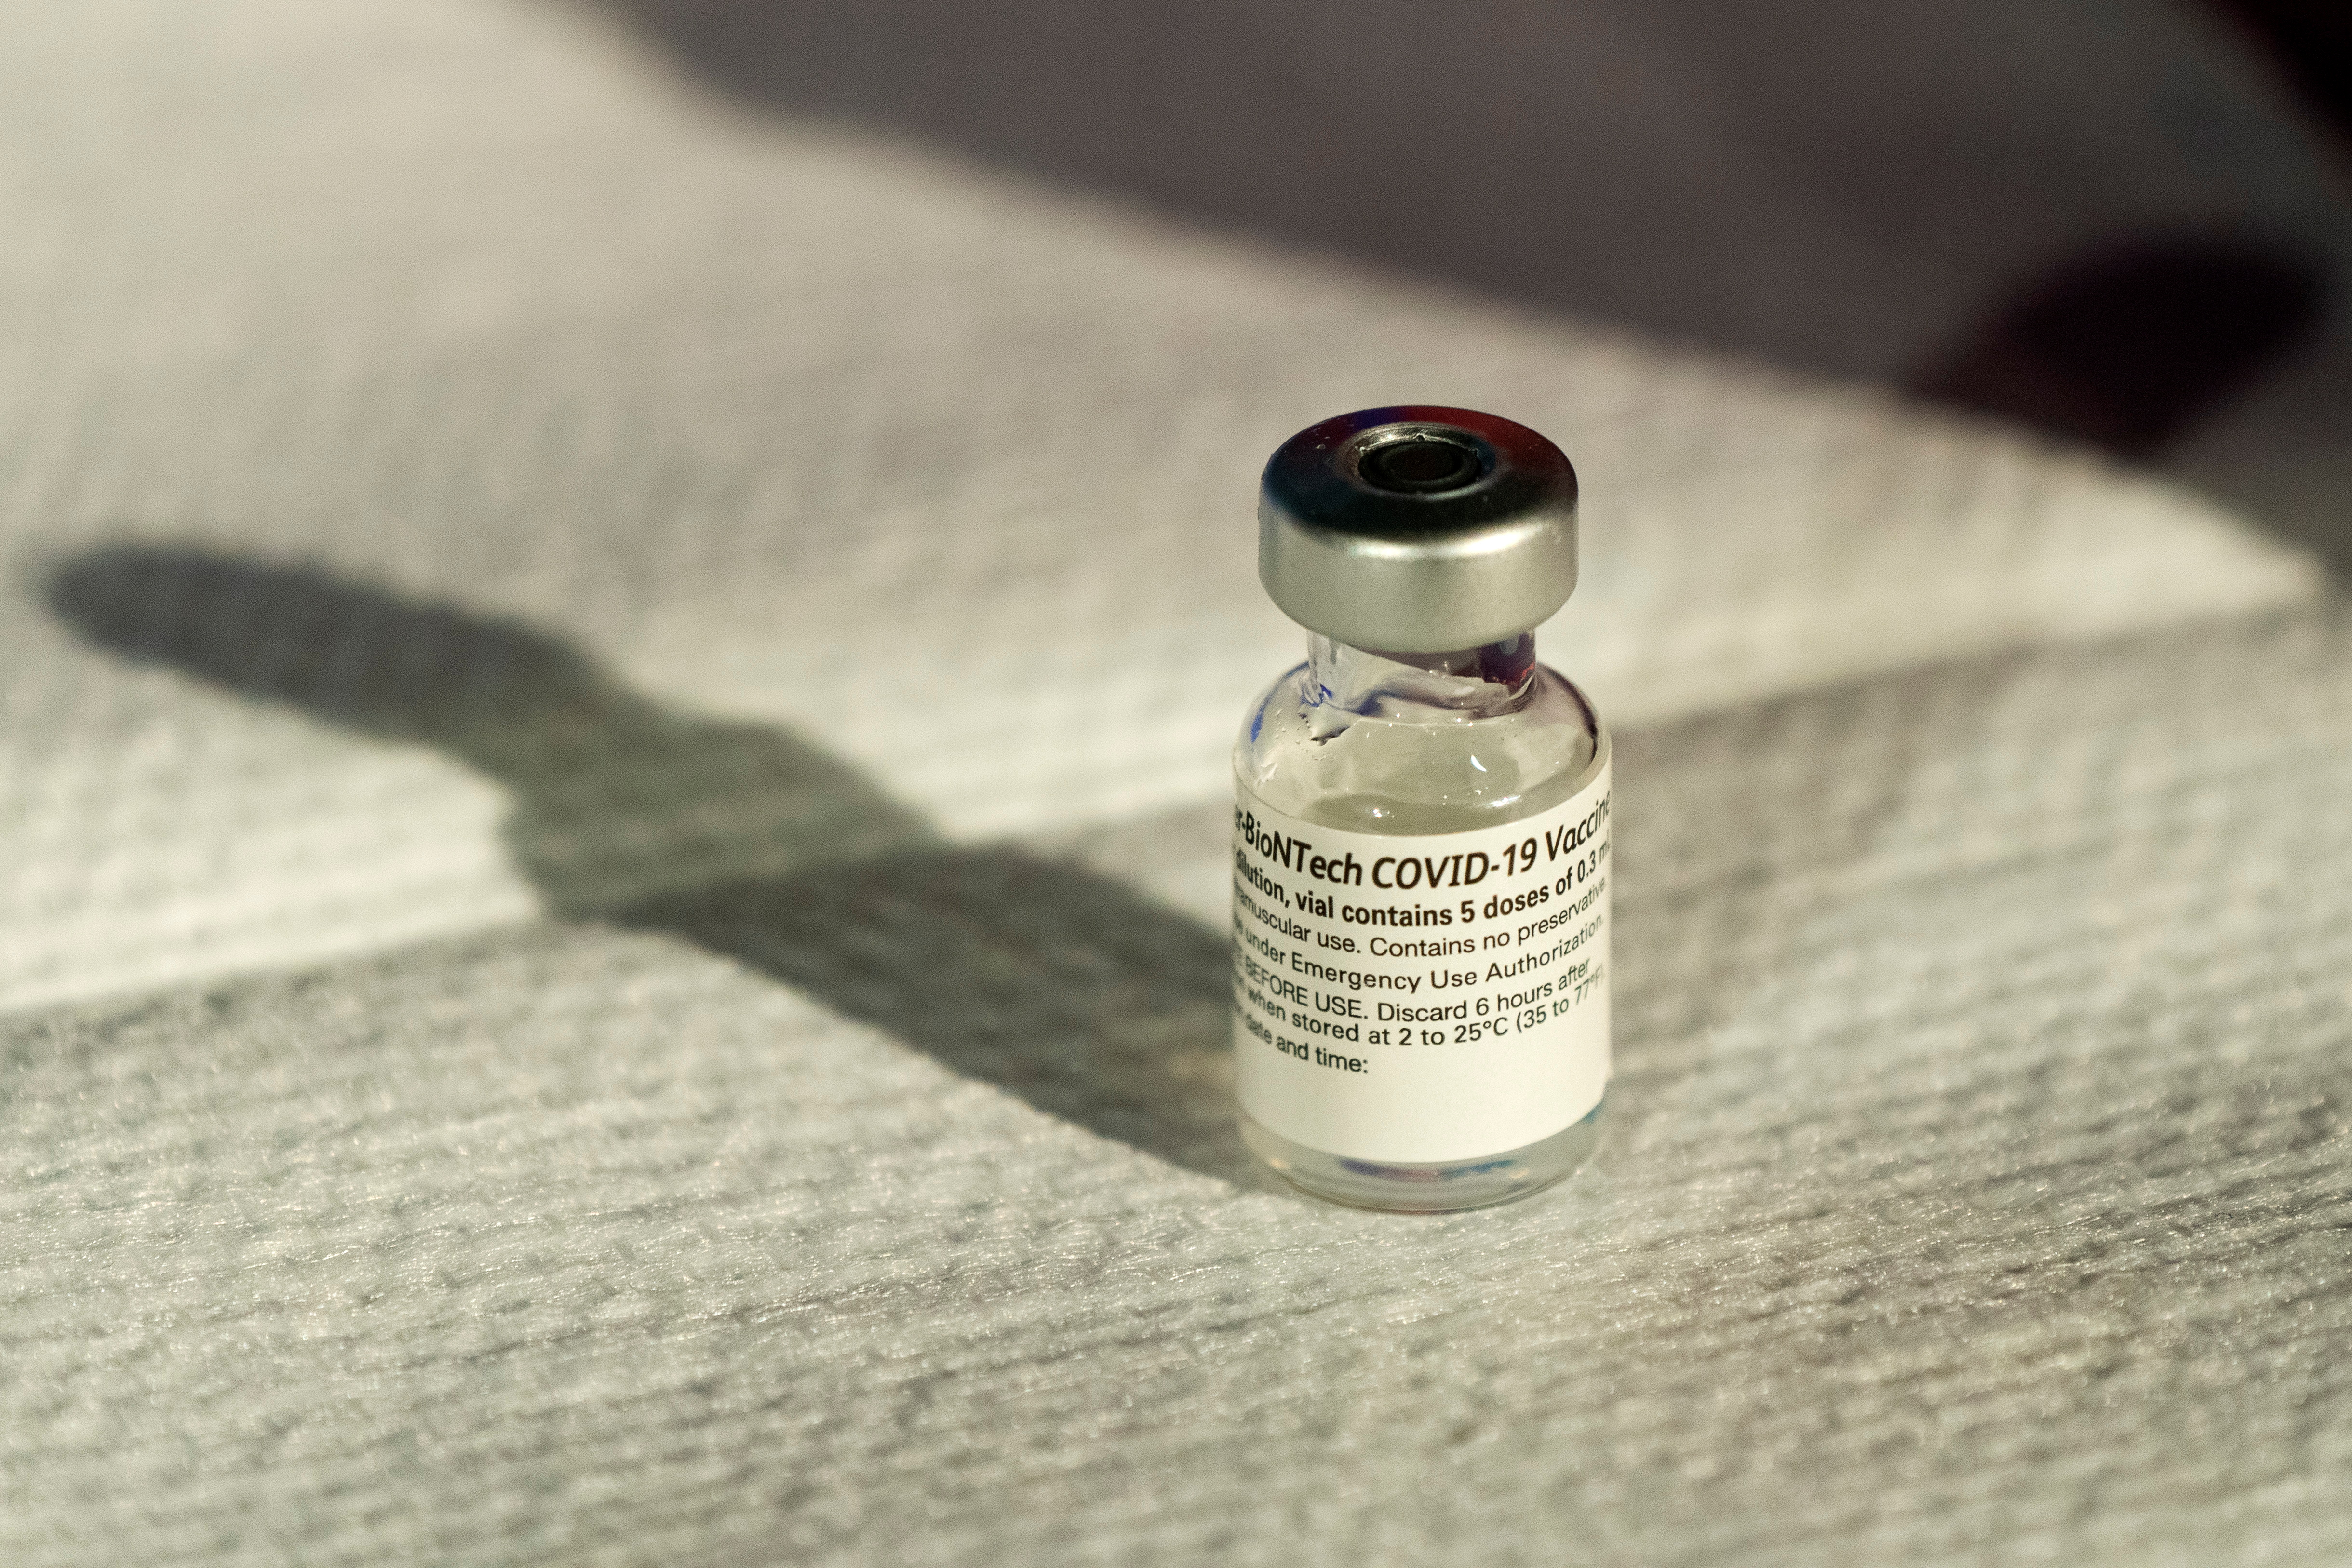 A vial of Pfizer's COVID-19 vaccine that received emergency use authorization is seen at George Washington University Hospital in Washington, D.C., U.S. December 14, 2020. Jacquelyn Martin/Pool via REUTERS